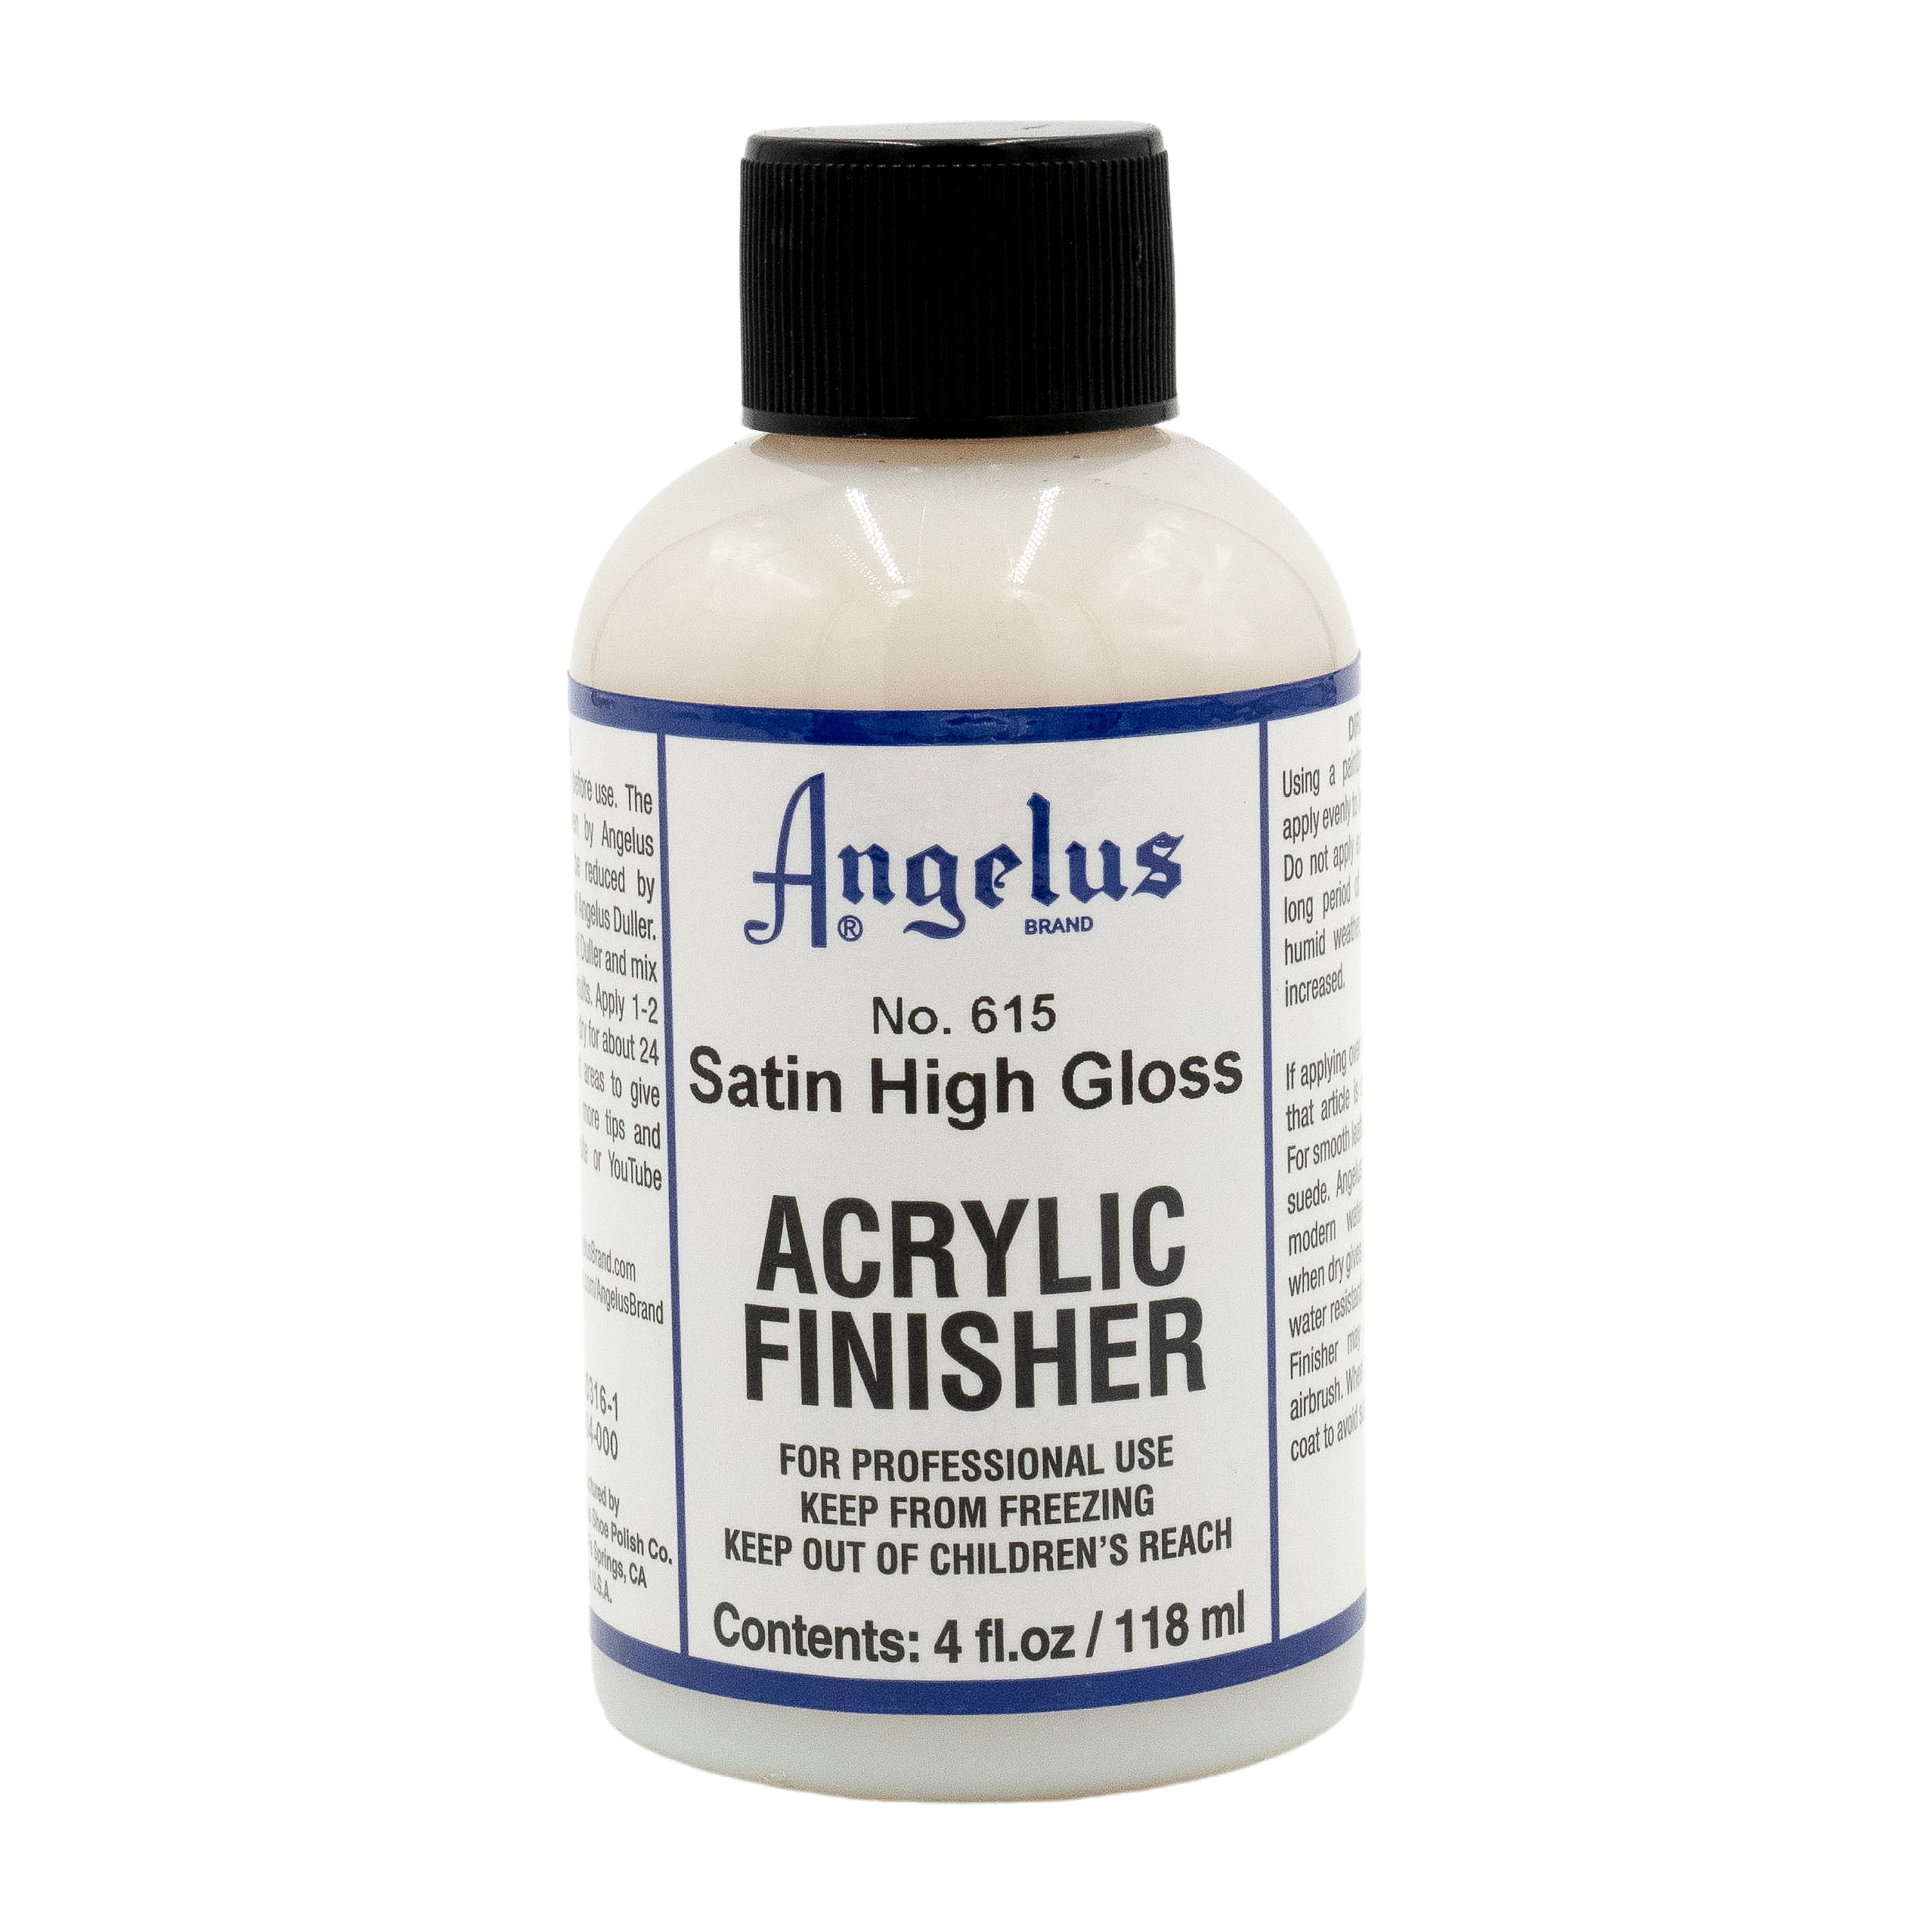 Angelus Leather Acrylic Finisher Matte 1oz - Wet Paint Artists' Materials  and Framing